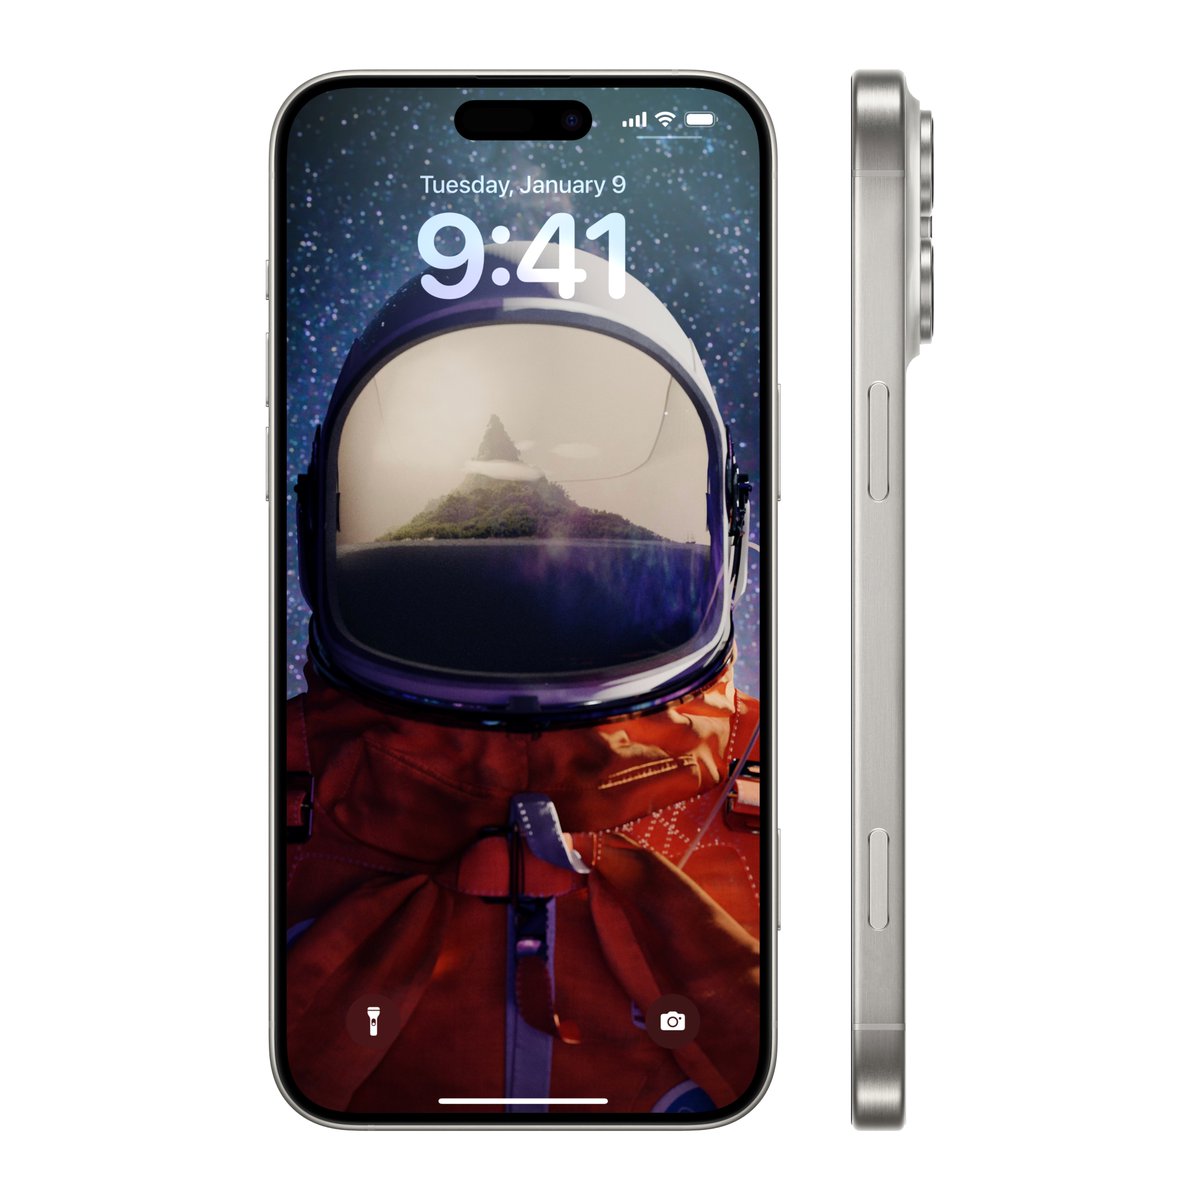 iPhone 16 Pro/Ultra rumors so far 👇

Larger 6.3” and 6.9” sizes
MLA OLED displays
Haptic solid-state buttons
New “Capture Button”
A18 Pro chip
48MP Ultra Wide camera
5x Telephoto on smaller Pro model
Super periscope camera on Pro Max/Ultra
WiFi 7 support
Exclusive on-device AI